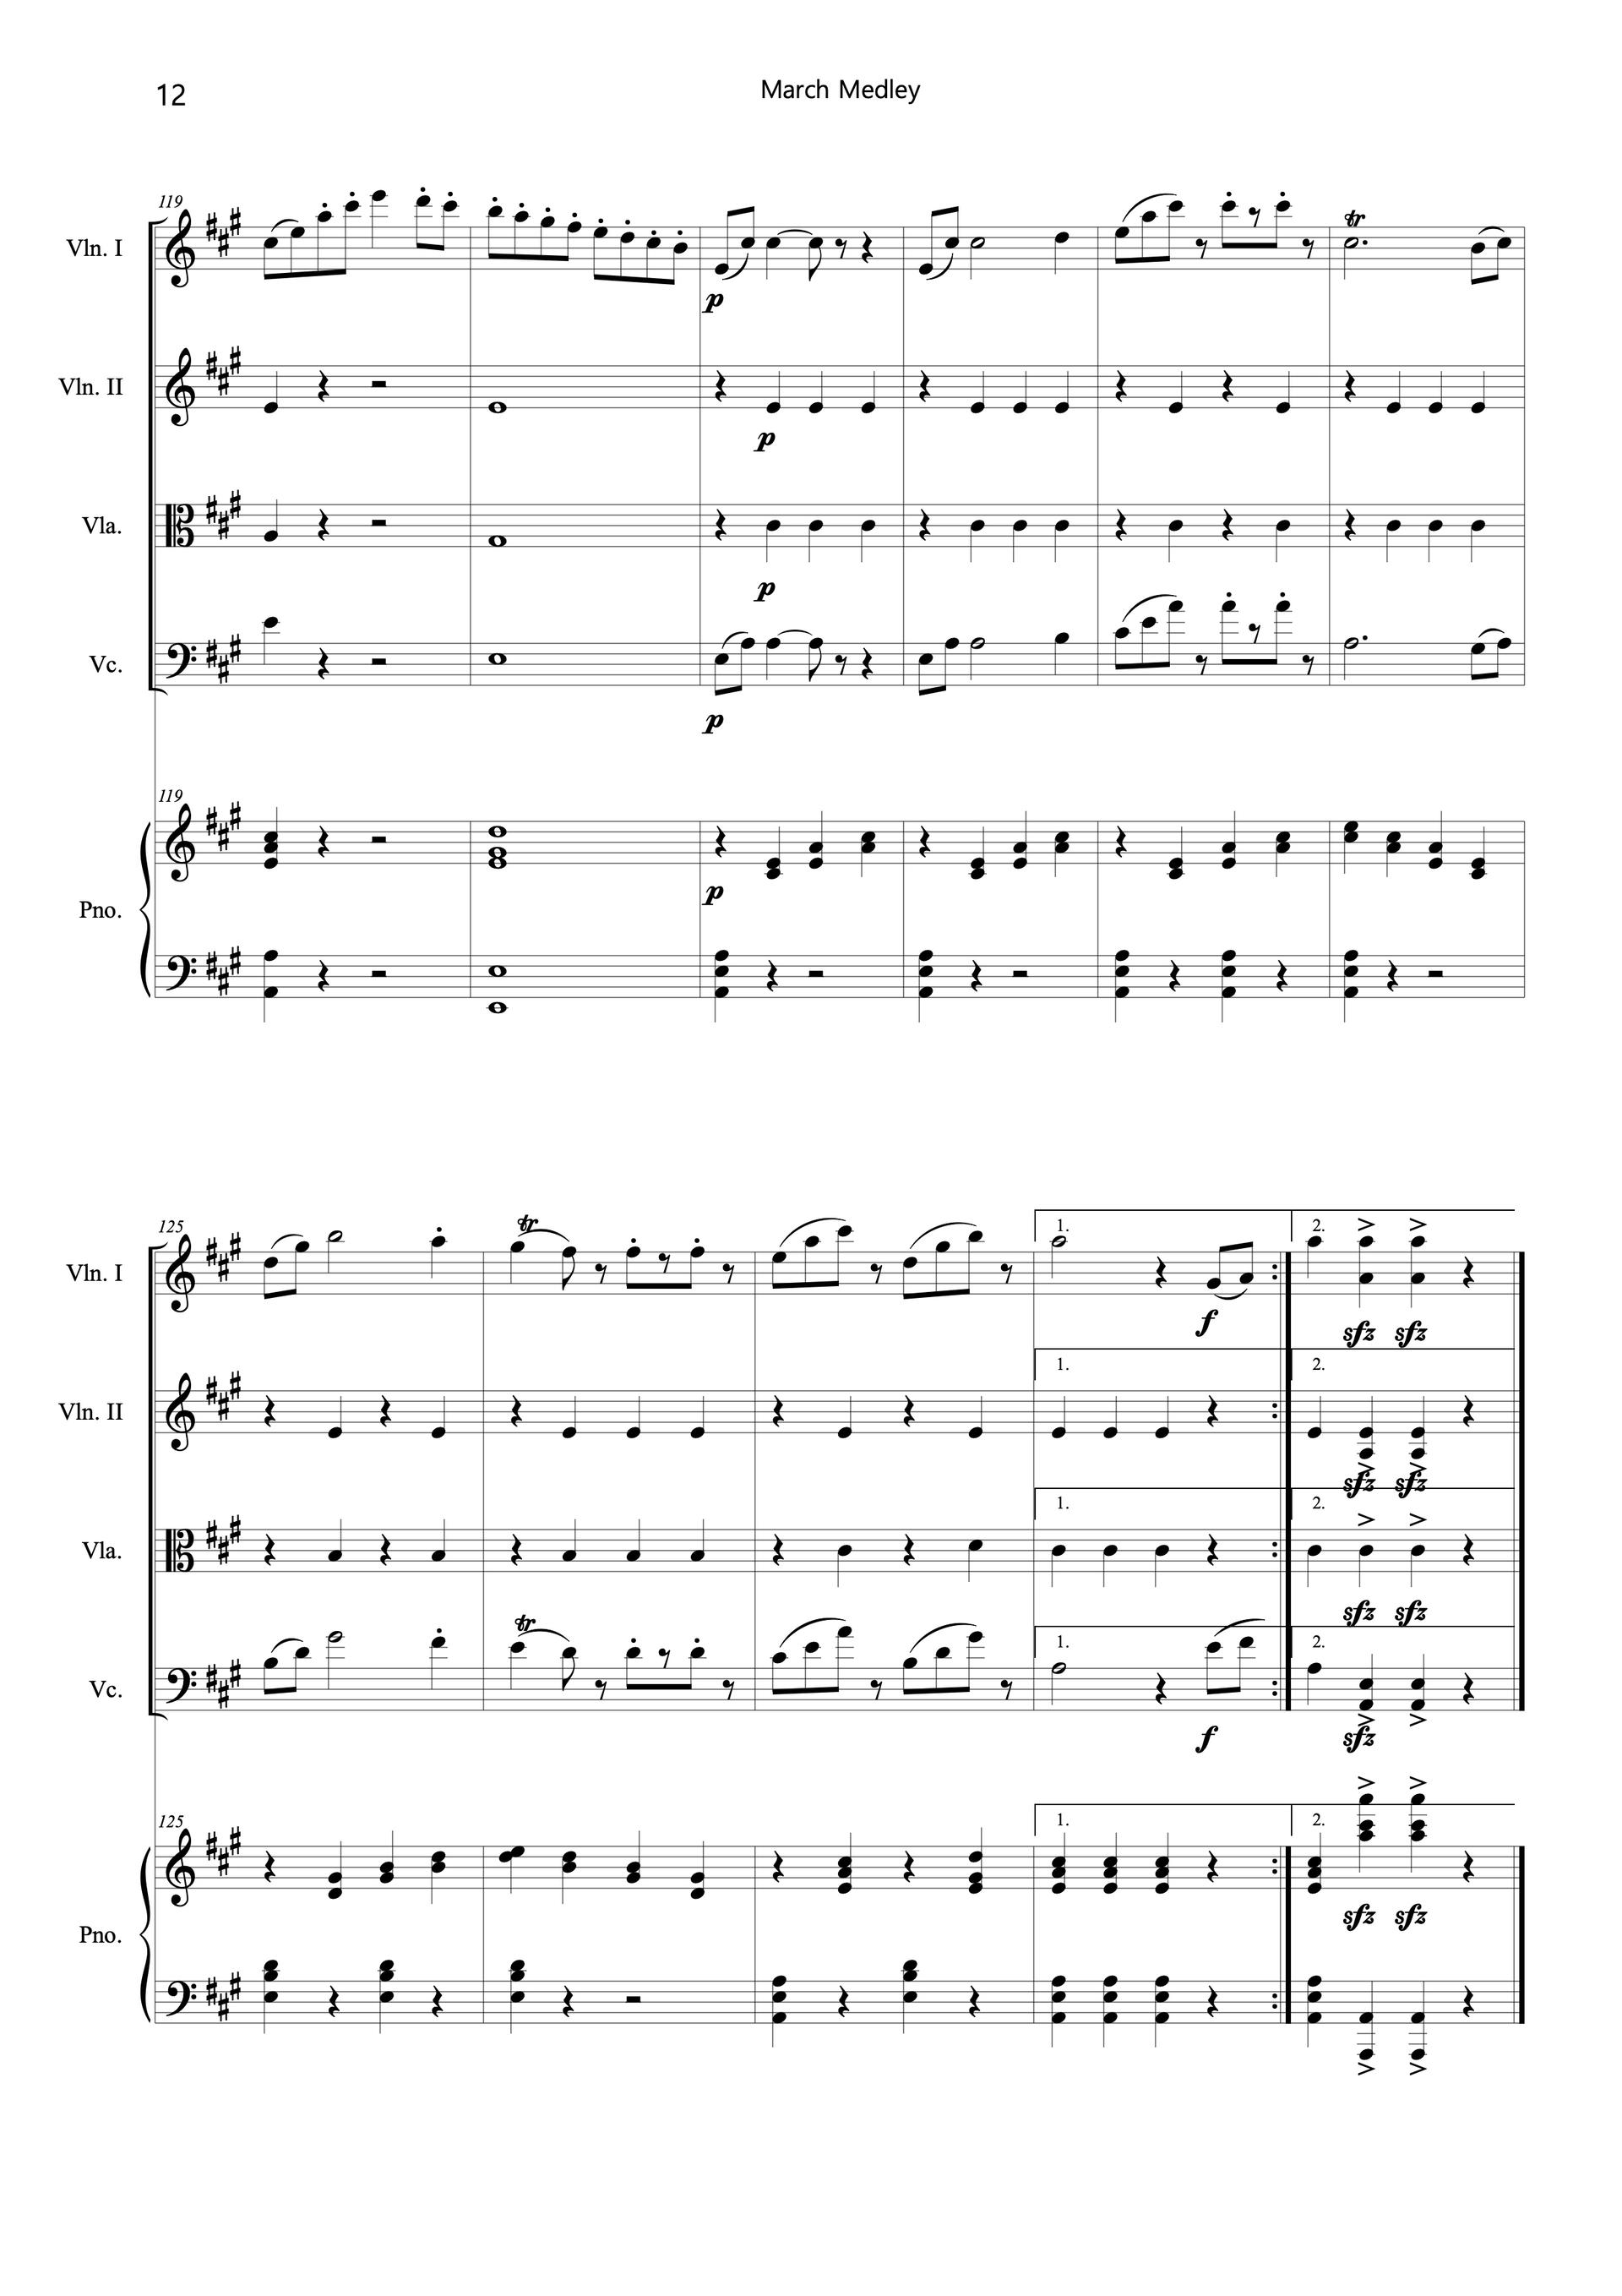 Sheet music of March Medley arranged for violins, viola, cello and piano quintet preview page 12